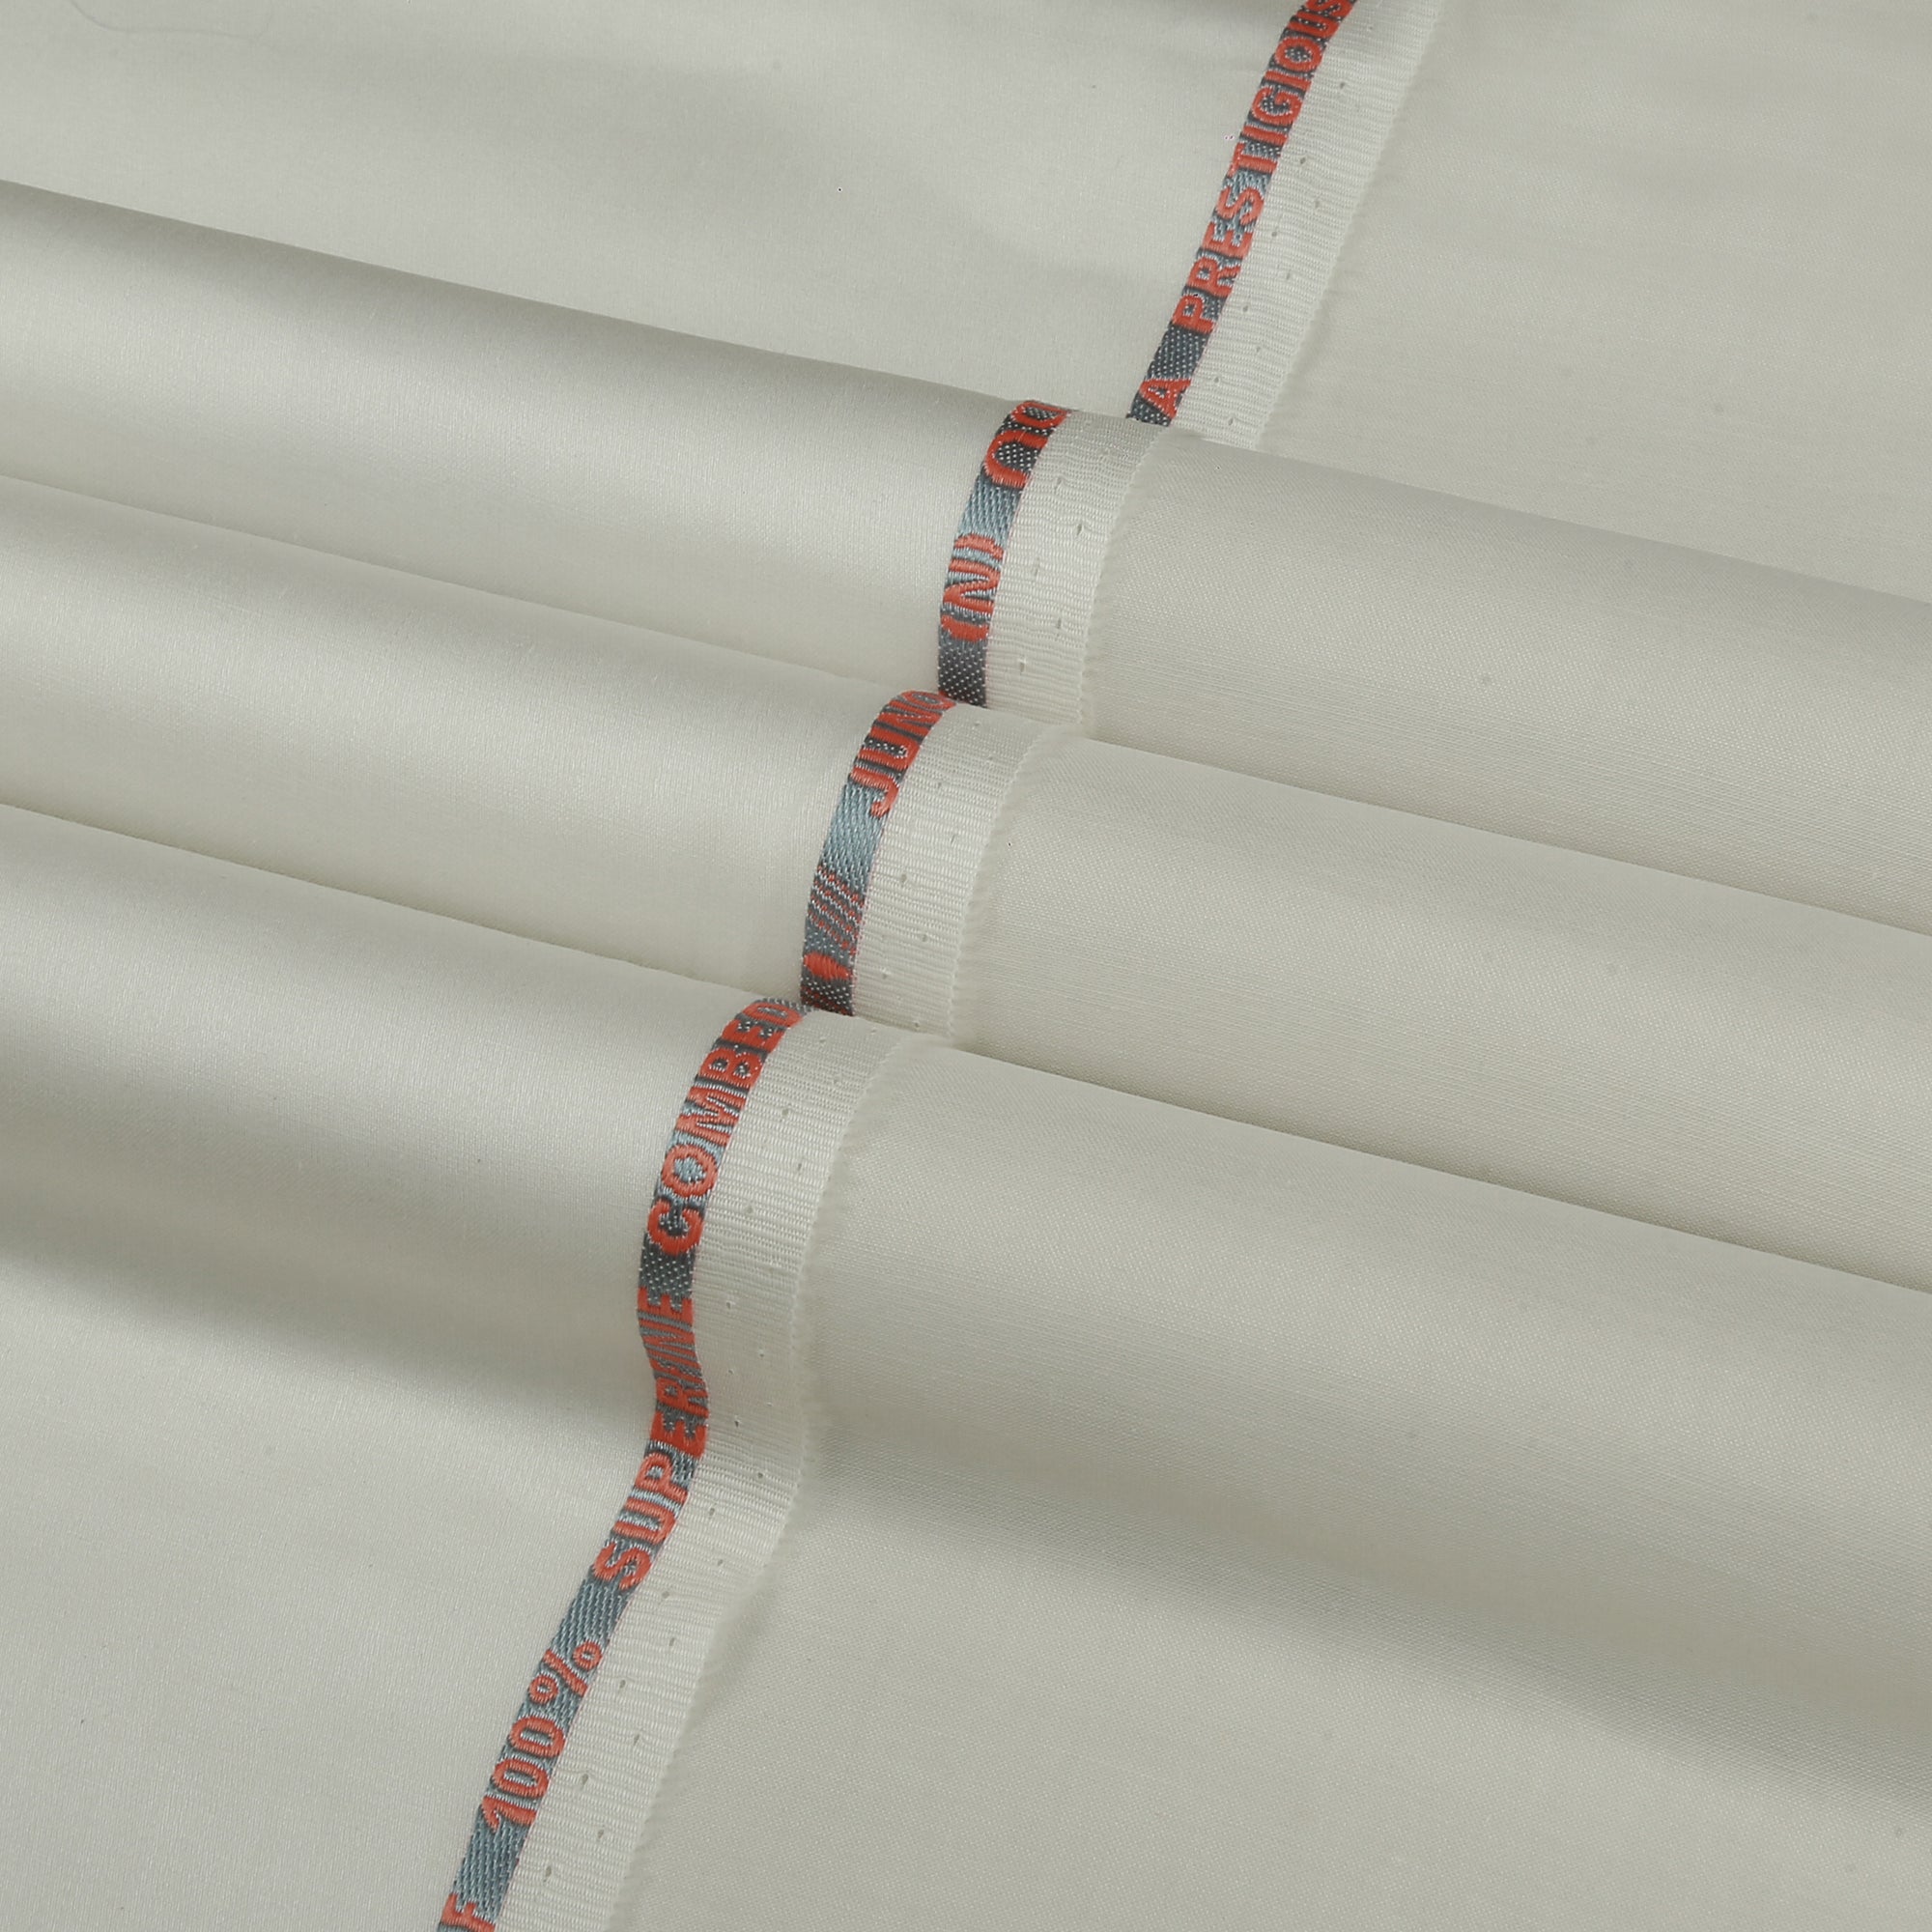 Junoon Satin (Soft) - Superfine Cotton L.A Finished (4.5 Mtr) - Narkin's Textile Industries